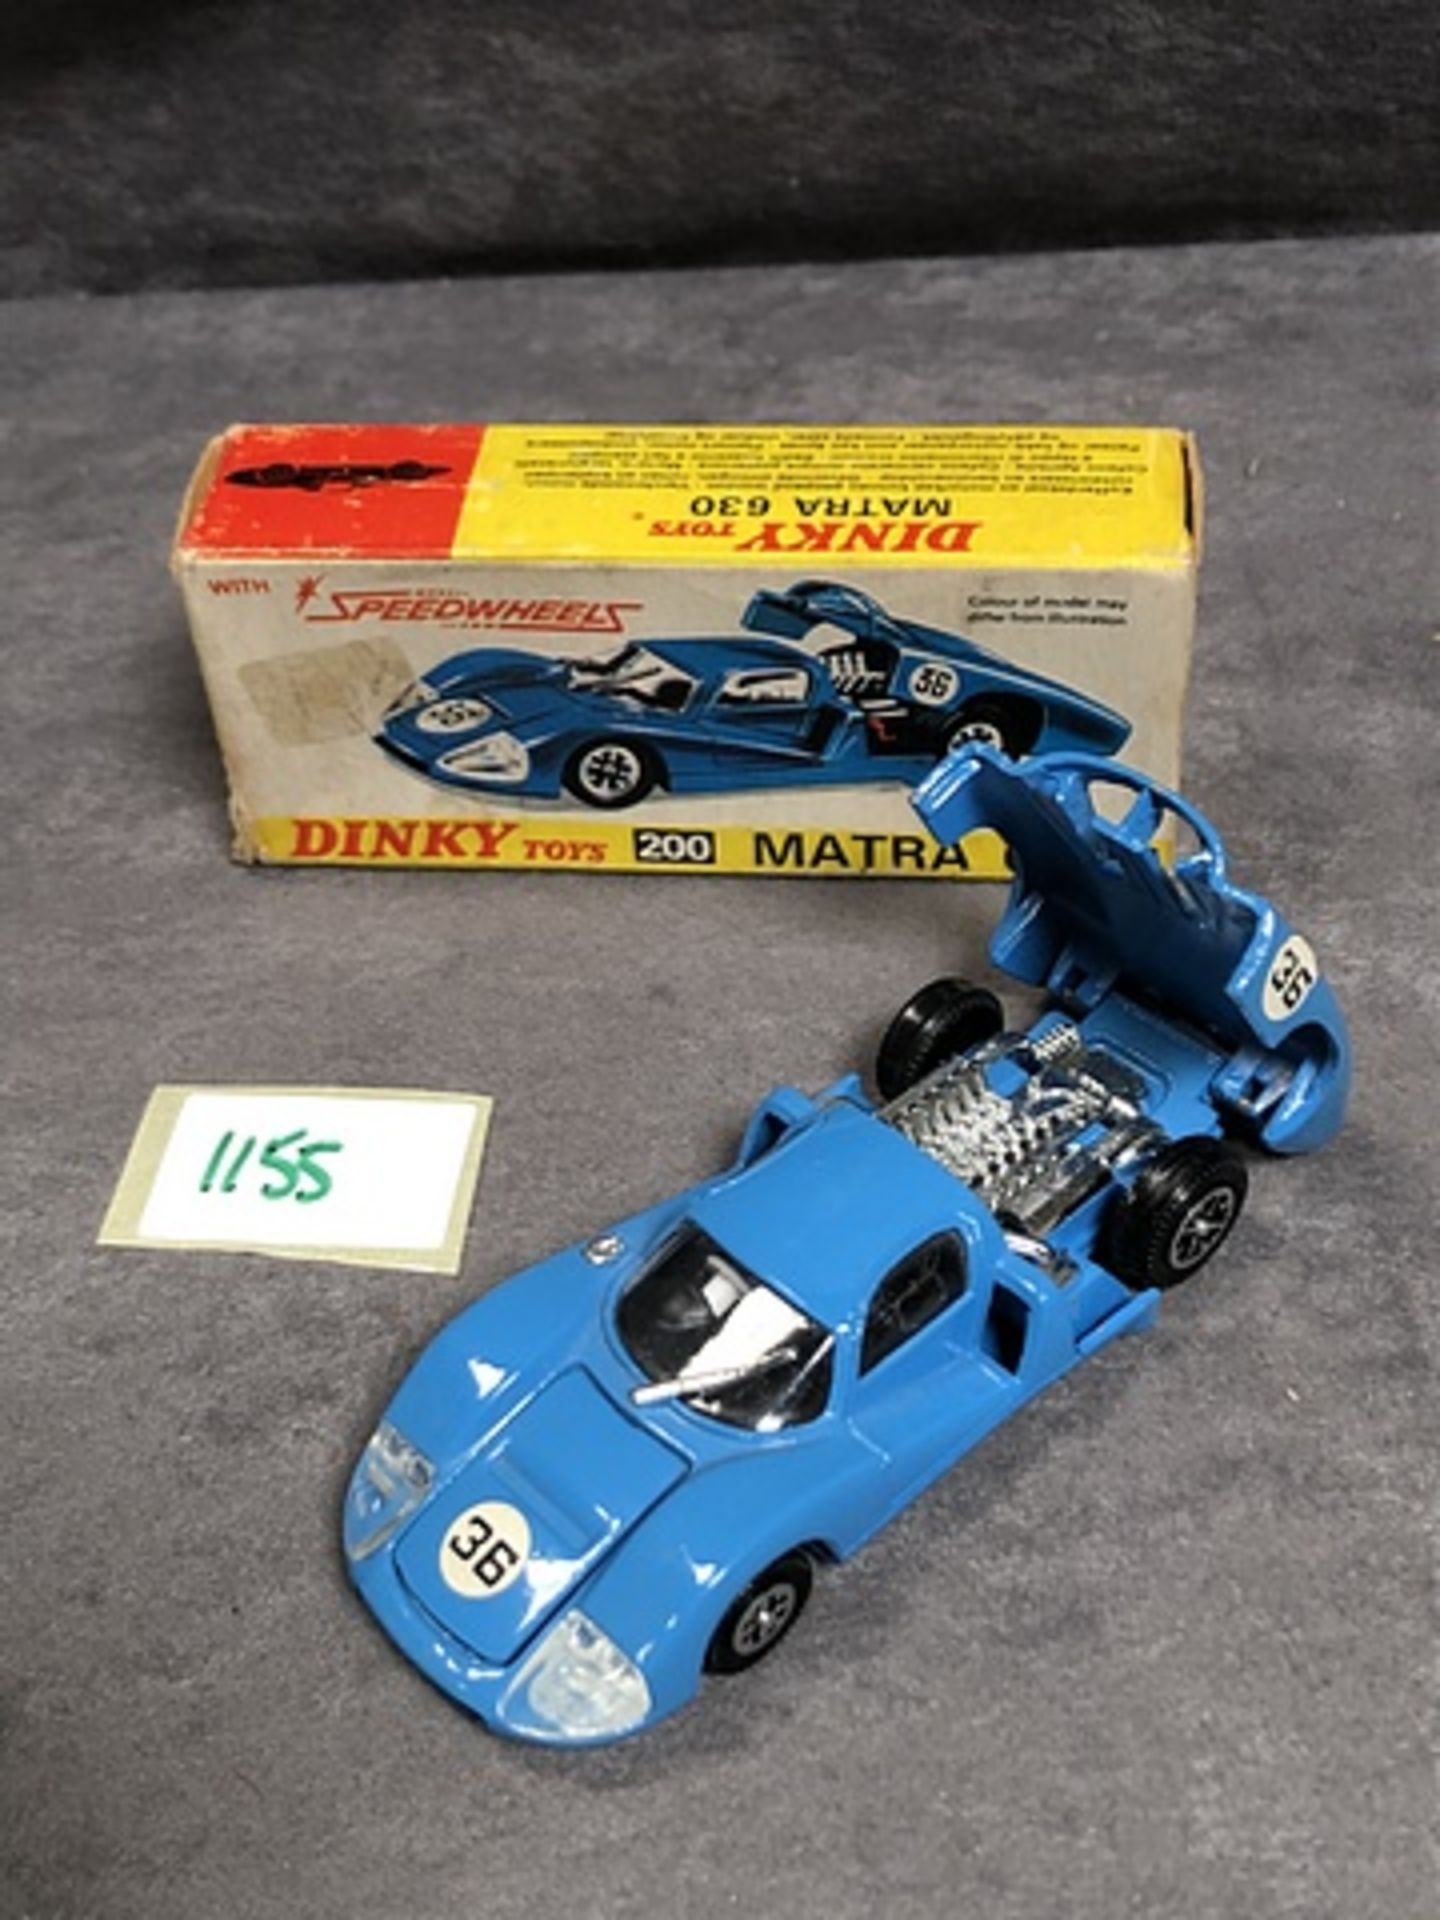 Dinky Toys Diecast #200 Matra 630 Mint condition model in a box - Image 2 of 2